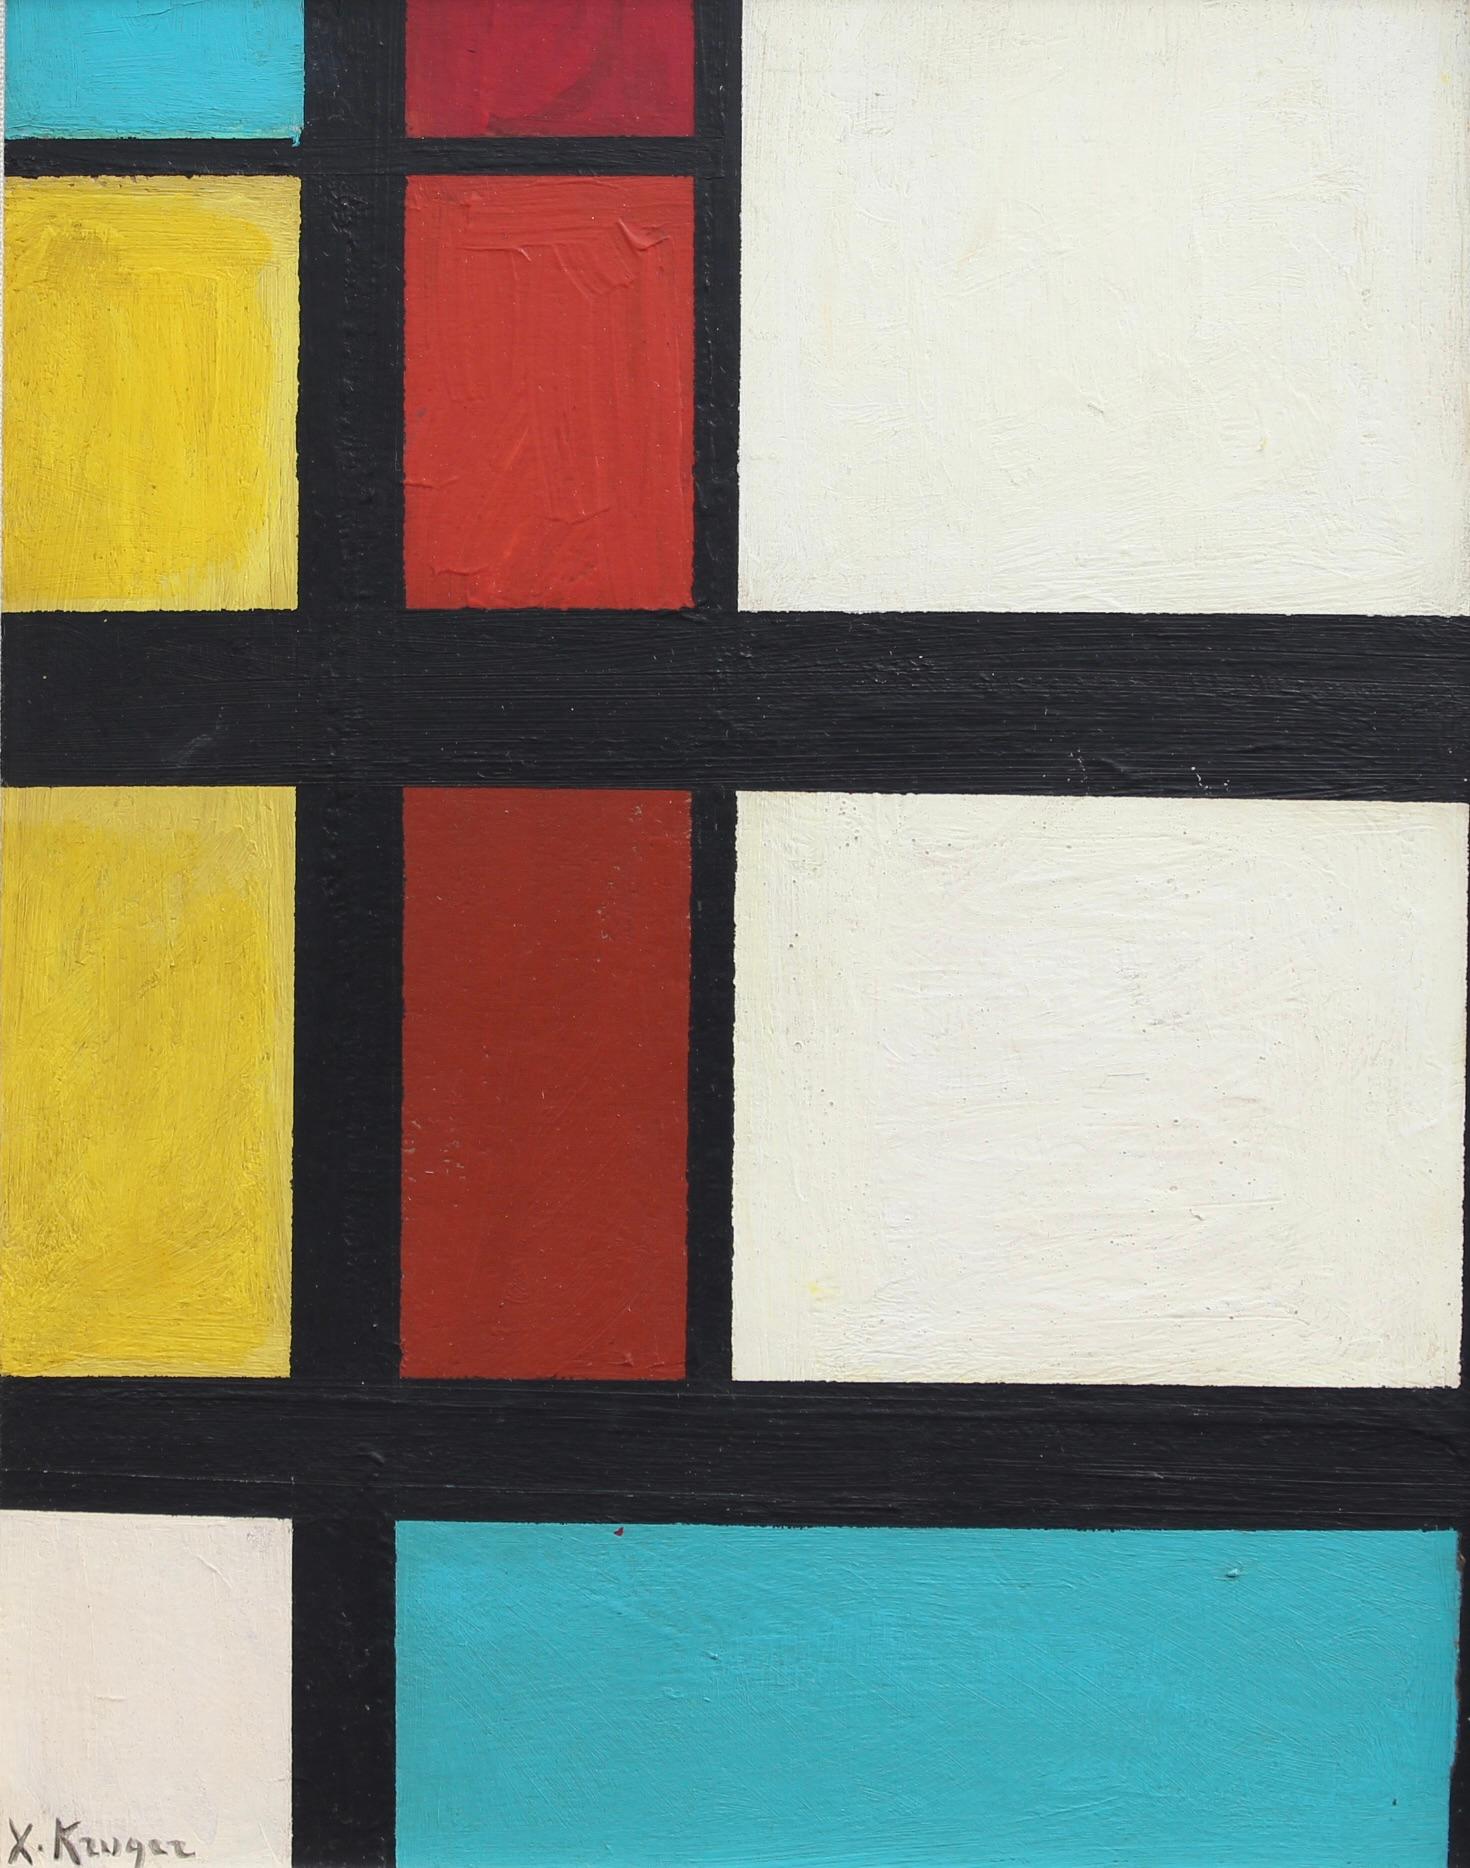 'Abstract of Lines and Colours', oil on panel (circa 1960s), German School, signed, 'X. Kruger'. This artwork is a clear homage to Piet Mondrian (1872-1944). Recognised for the purity of his abstractions, Mondrian radically simplified the elements